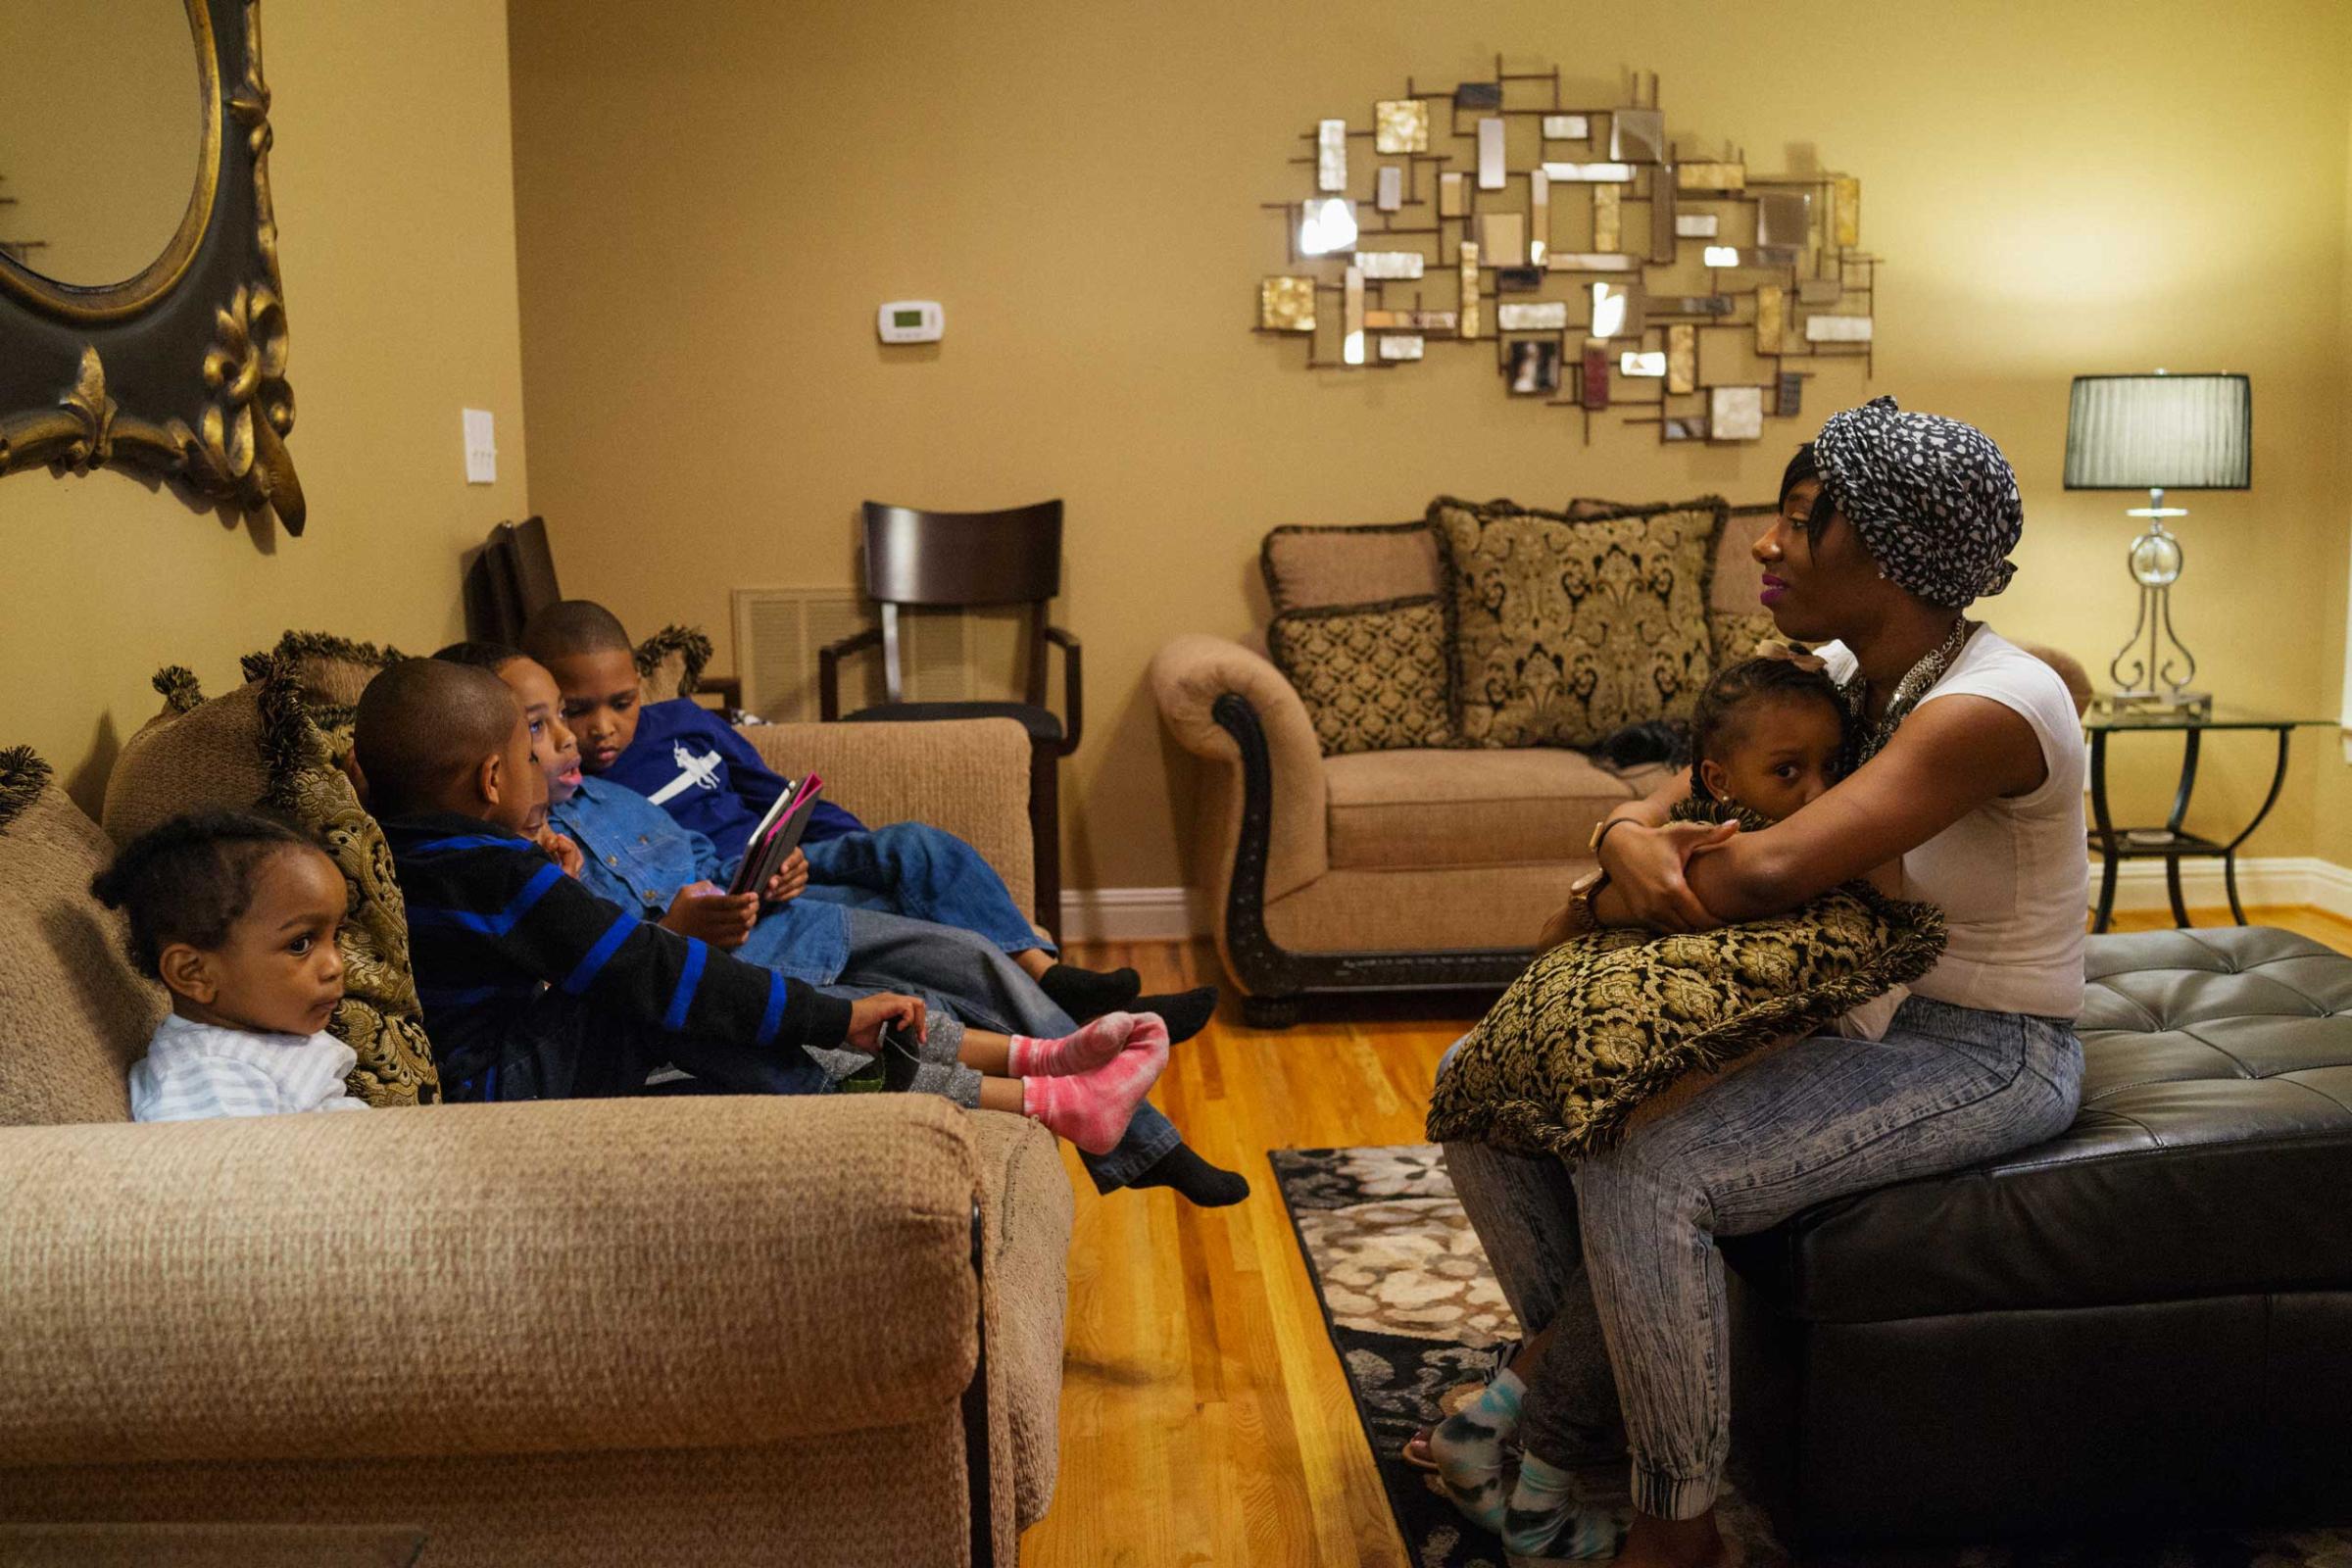 Angelique McClure hangs out with her nieces and nephews in the living room during a family dinner at her father's home in Birmingham, Ala. on March 22, 2015.